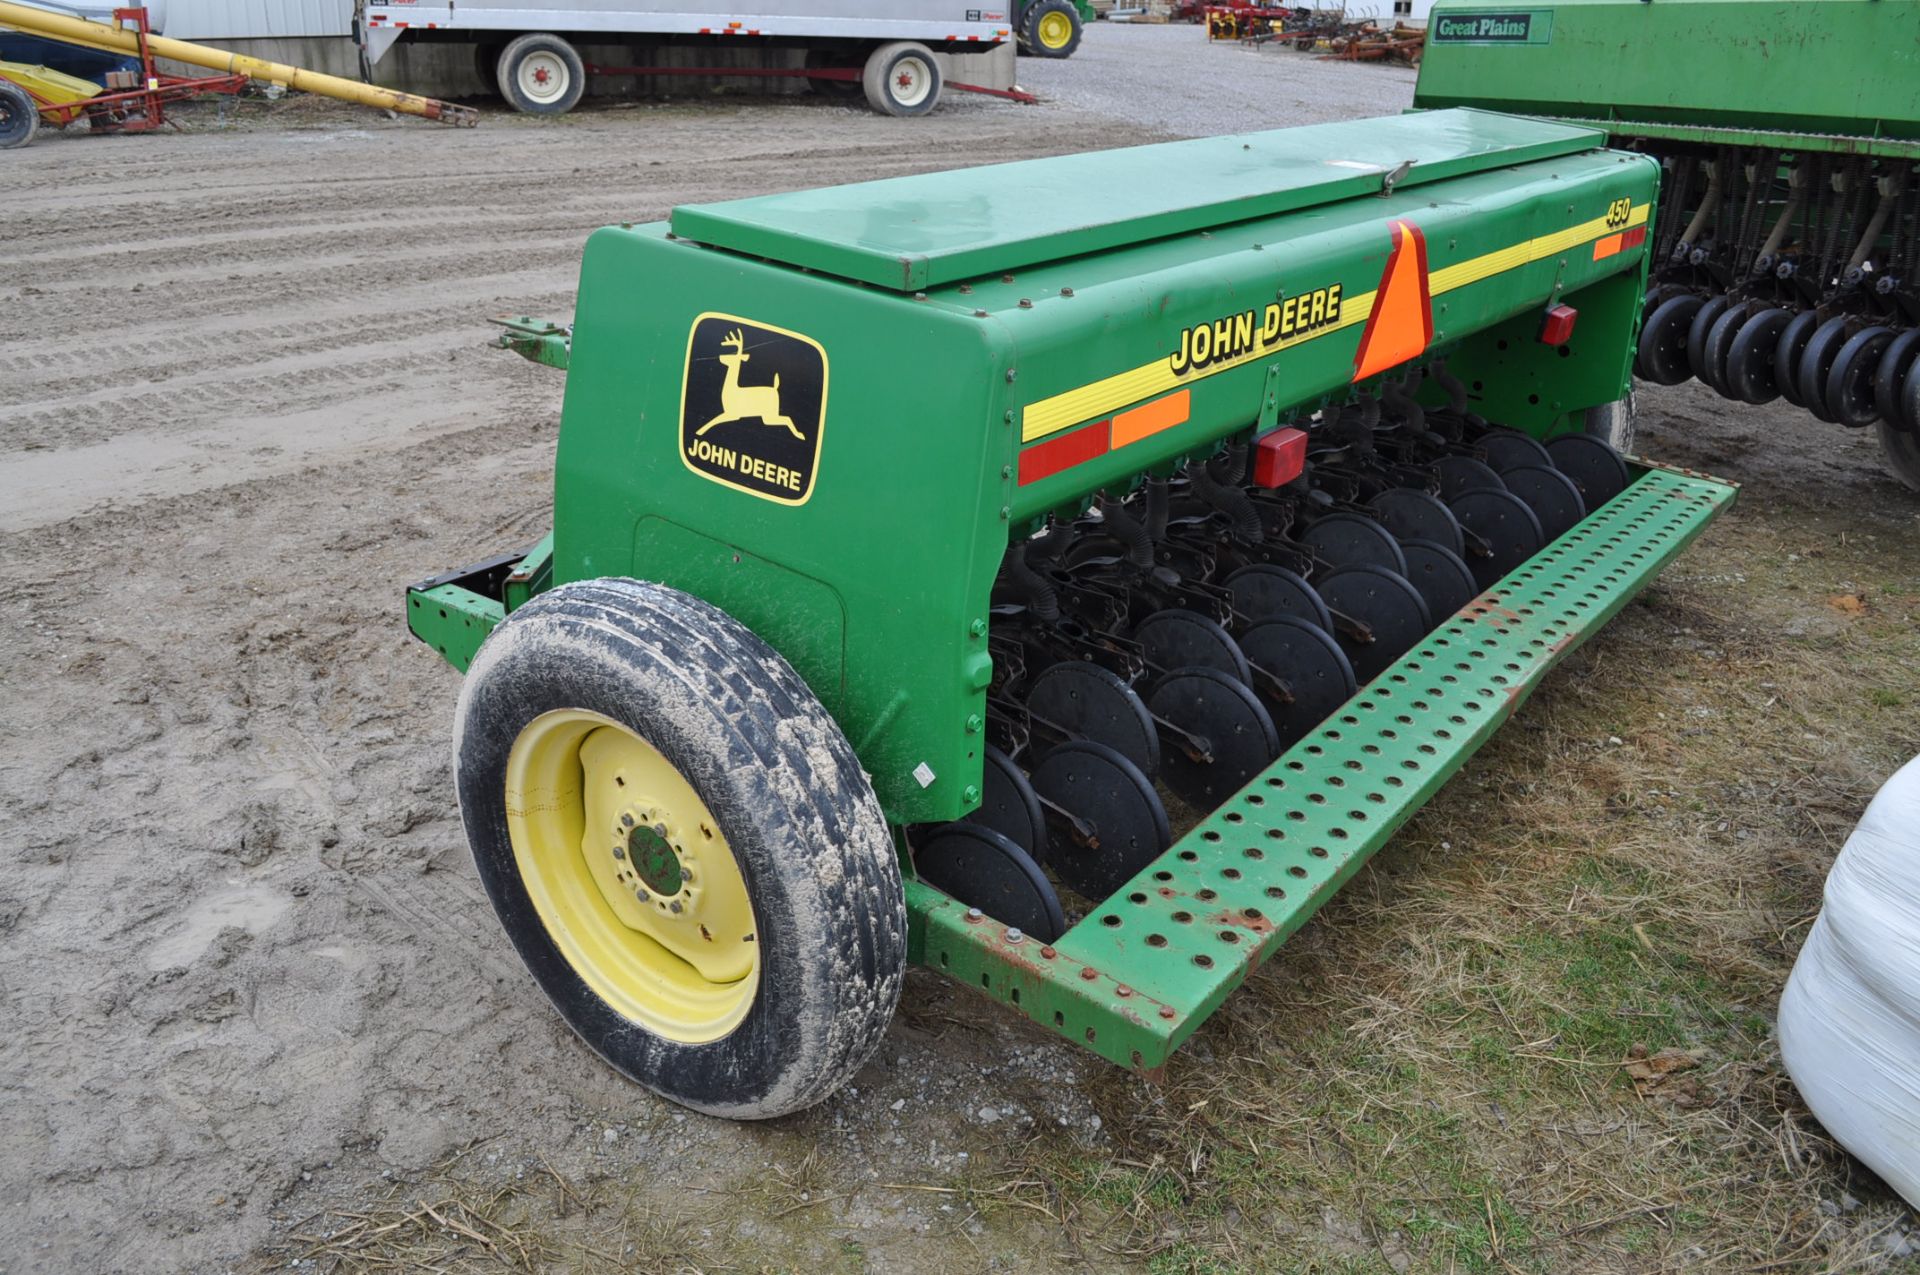 John Deere 450 end wheel grain drill, 17 hole, 7.50-20 tires, SN 690610, low acres - Image 4 of 8